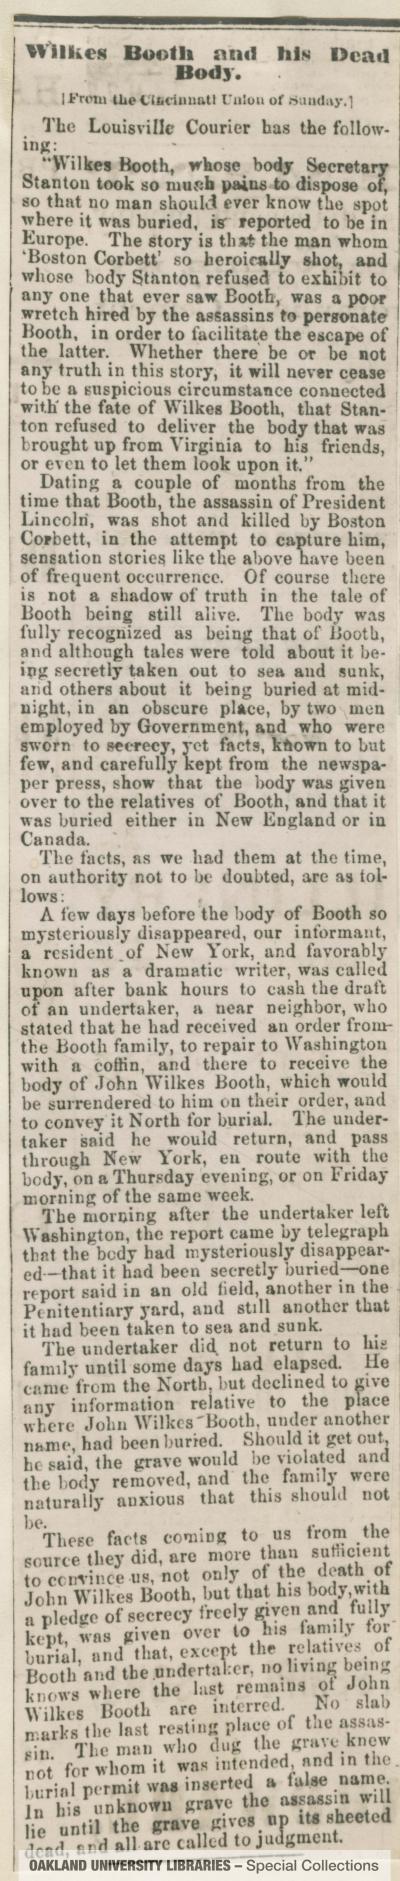 Wilkes Booth and his Dead Body [From the Cincinnati Union of Sunday]